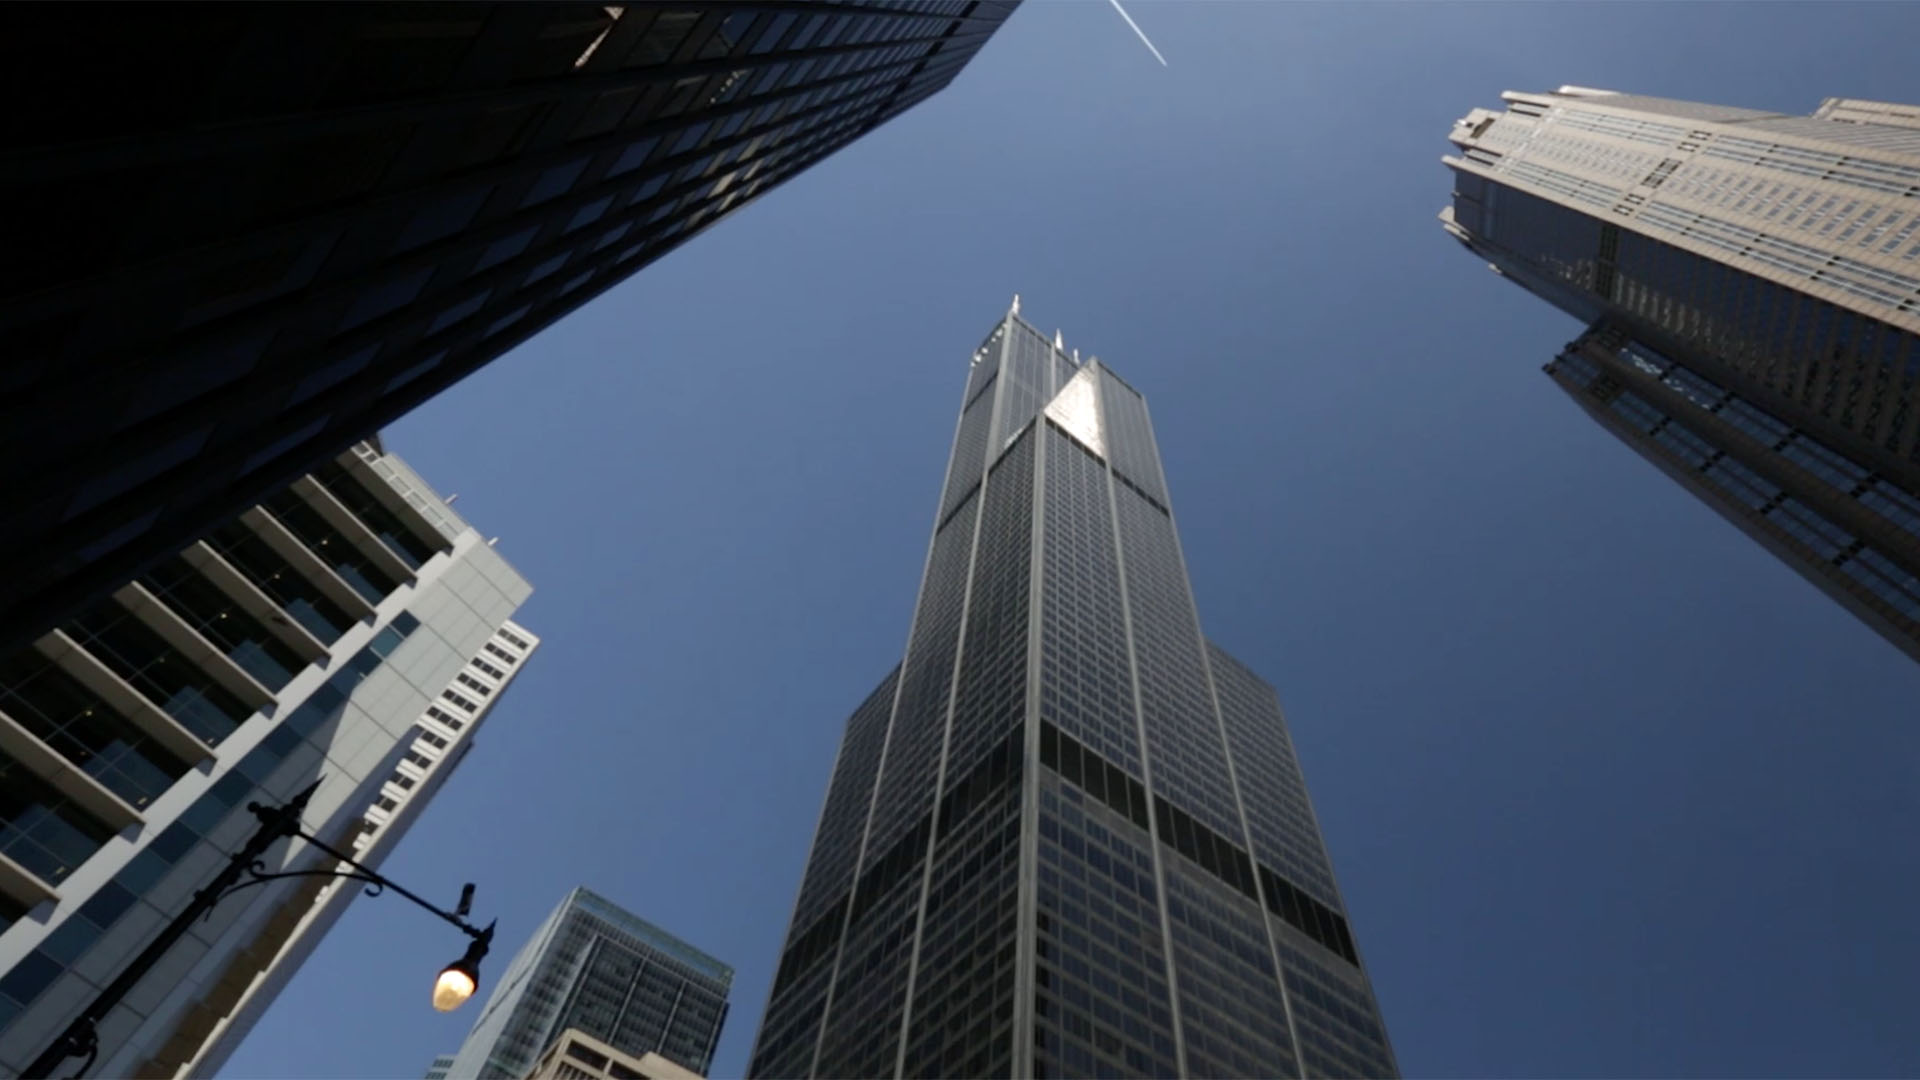 WILLIS TOWER: FORM